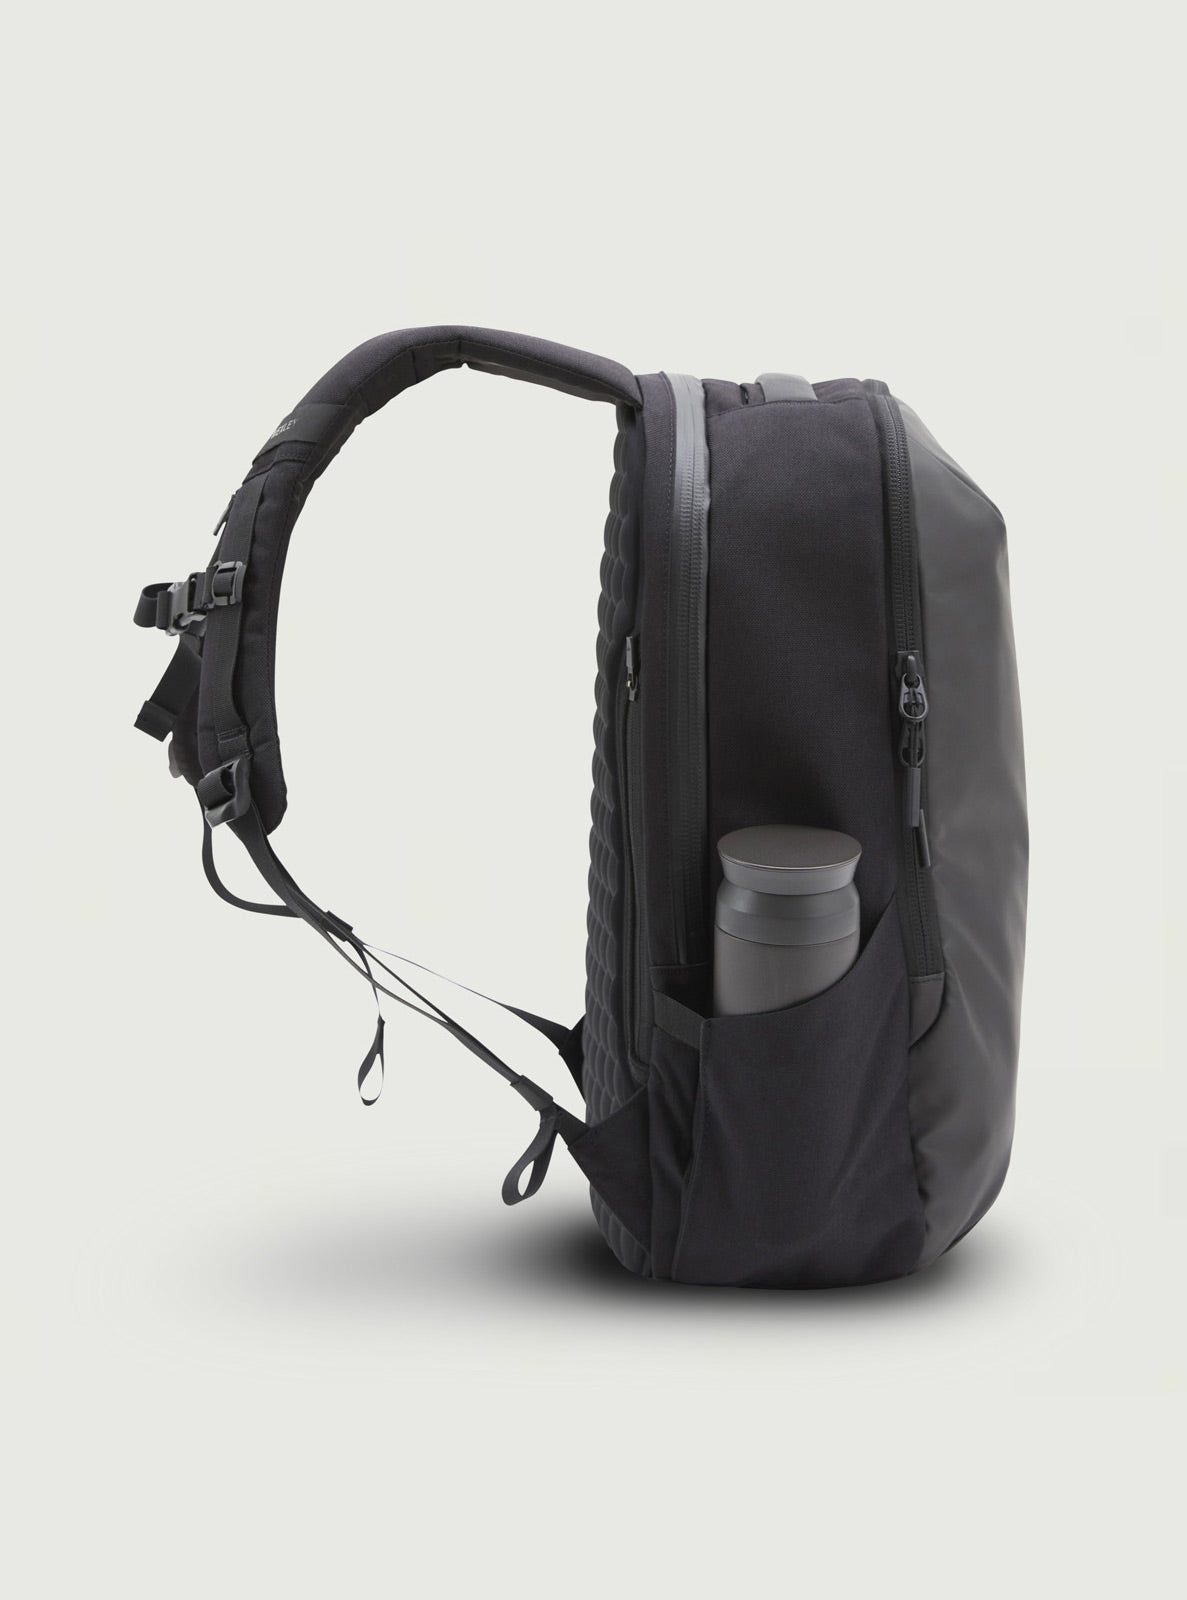 ACTIVE | BUSINESS PACK CORDURA® SERIES